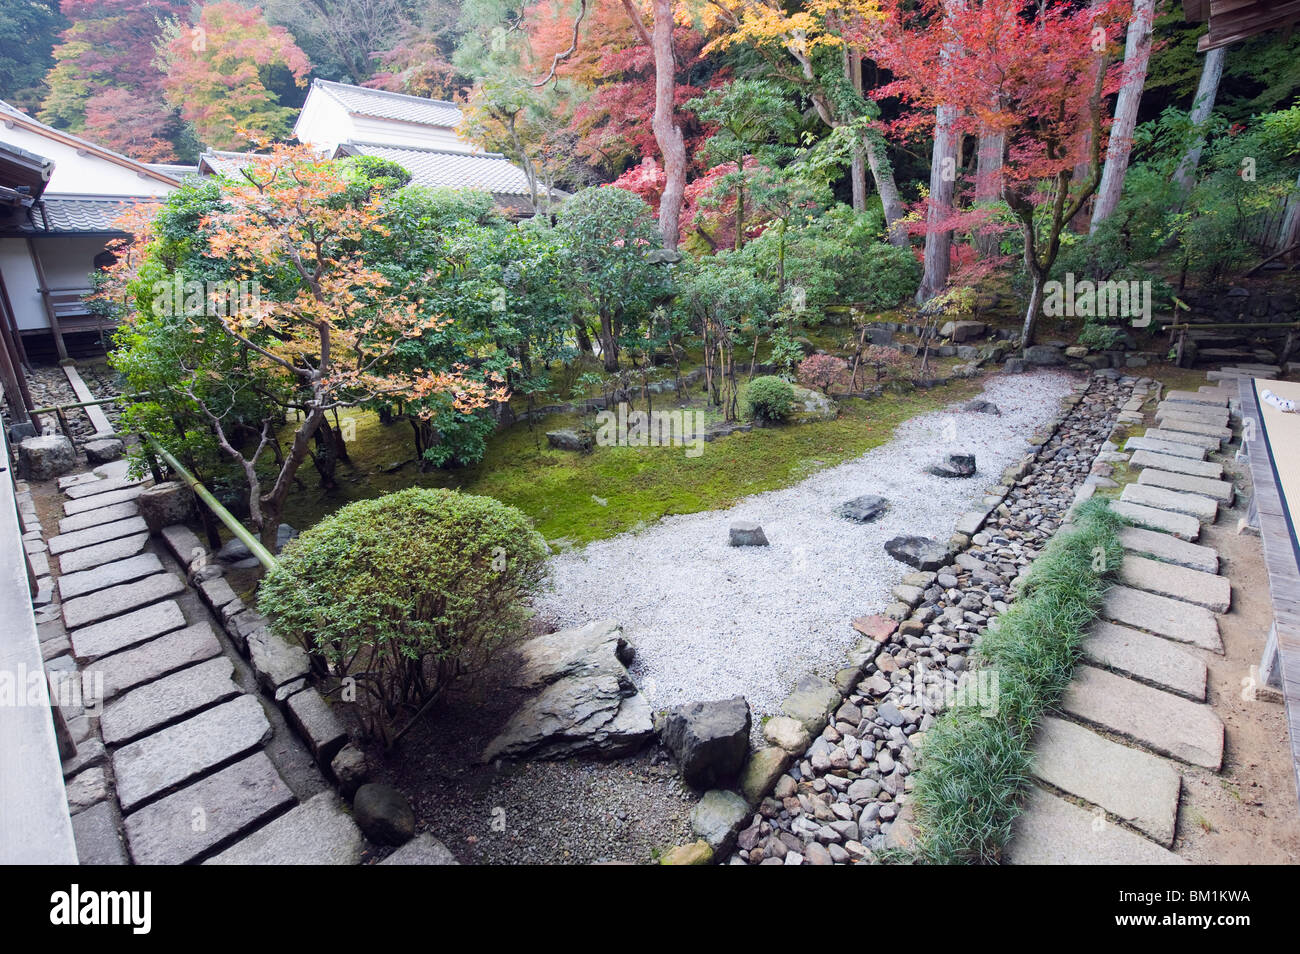 Autumn garden at Nison in (Nisonin) Temple, dating from 834, Sagano area, Kyoto, Japan, Asia Stock Photo